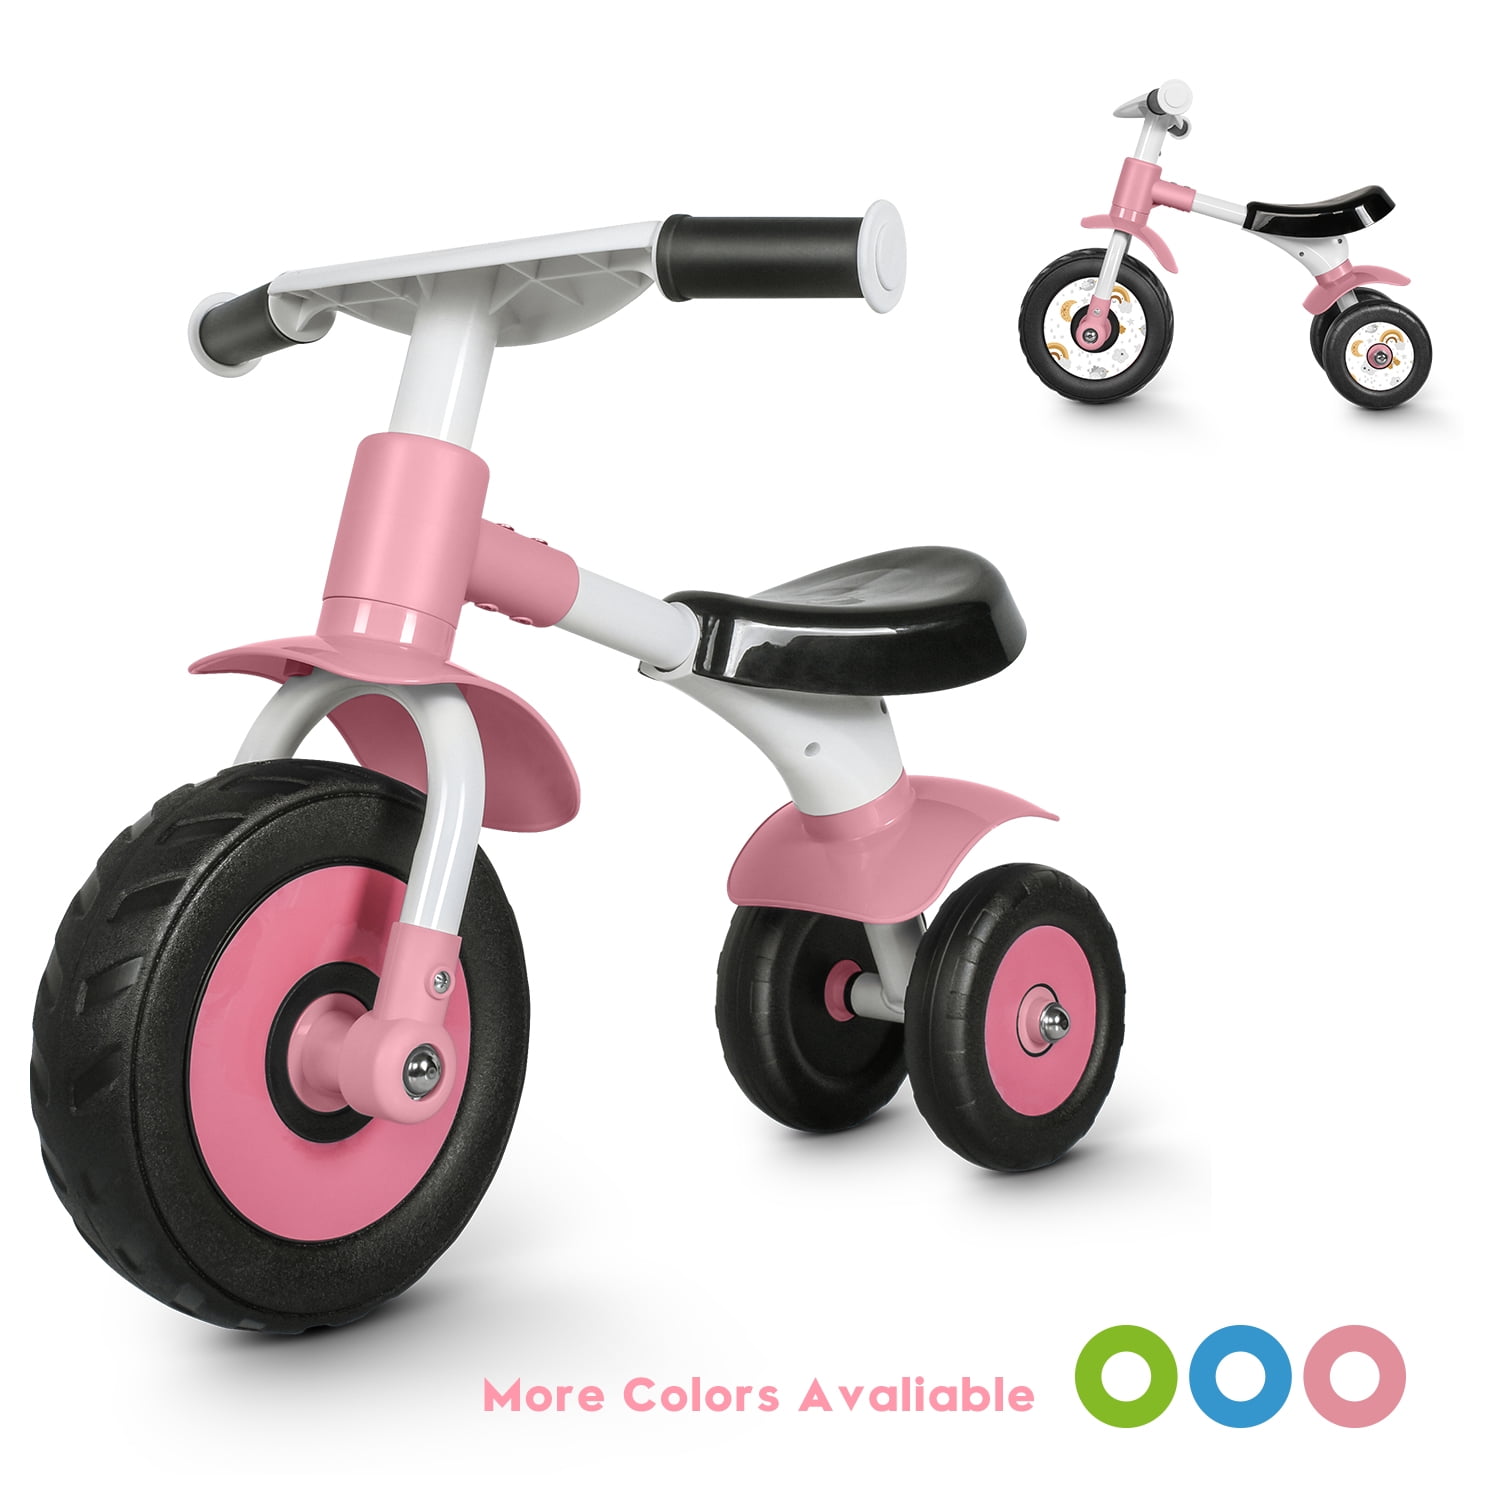 besrey Balance Bike Light Weight Kids Tricycle Toddler Bike for 1-5 Years Old Ultimate 3-in-1 Design Baby Bike